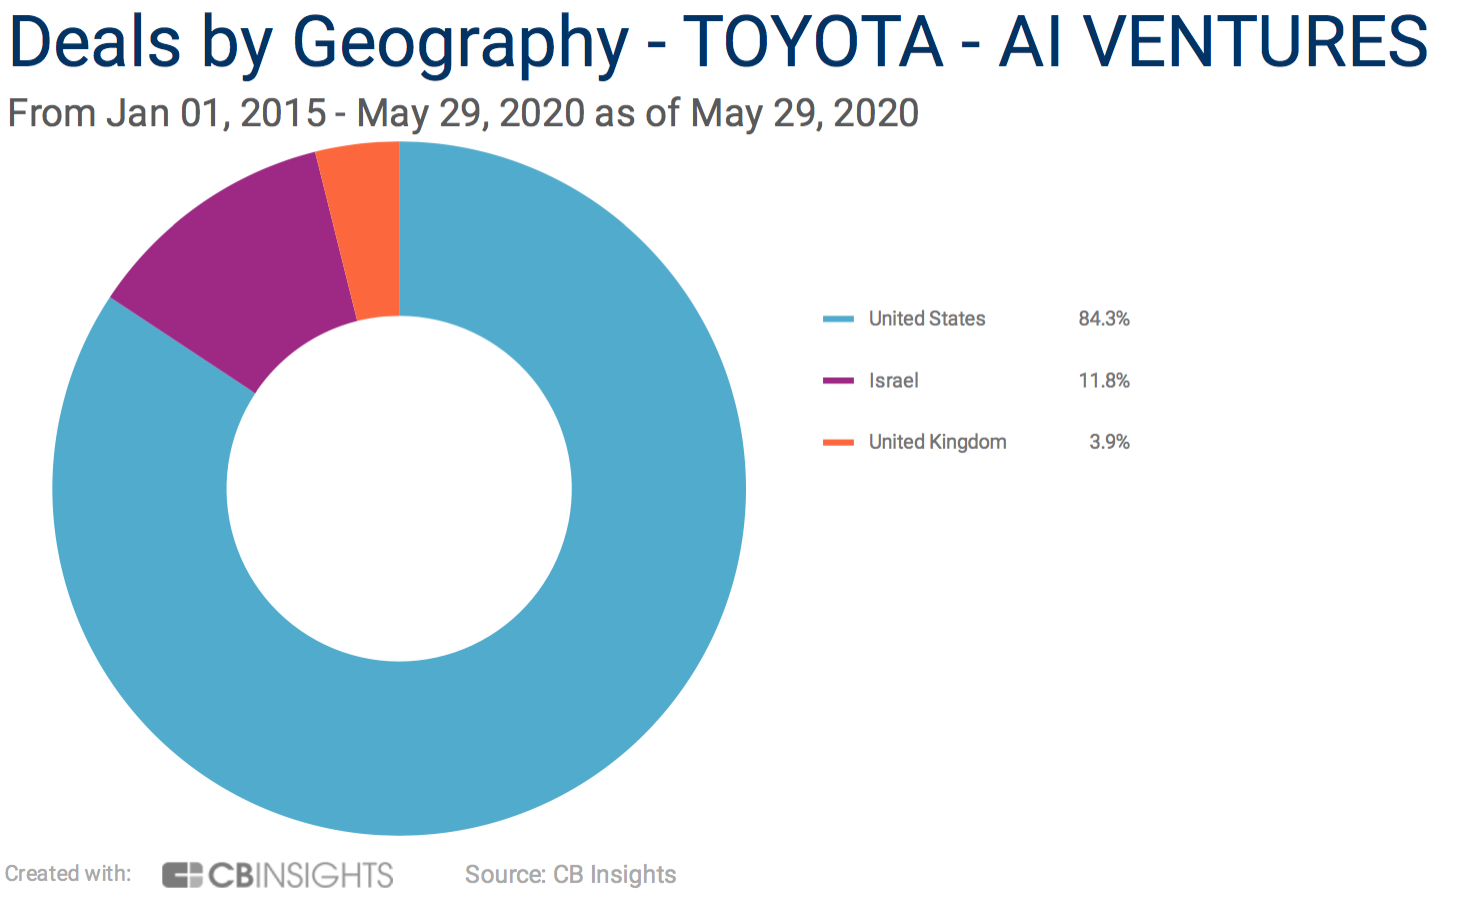 Deals by Geography- Toyota AI Ventures